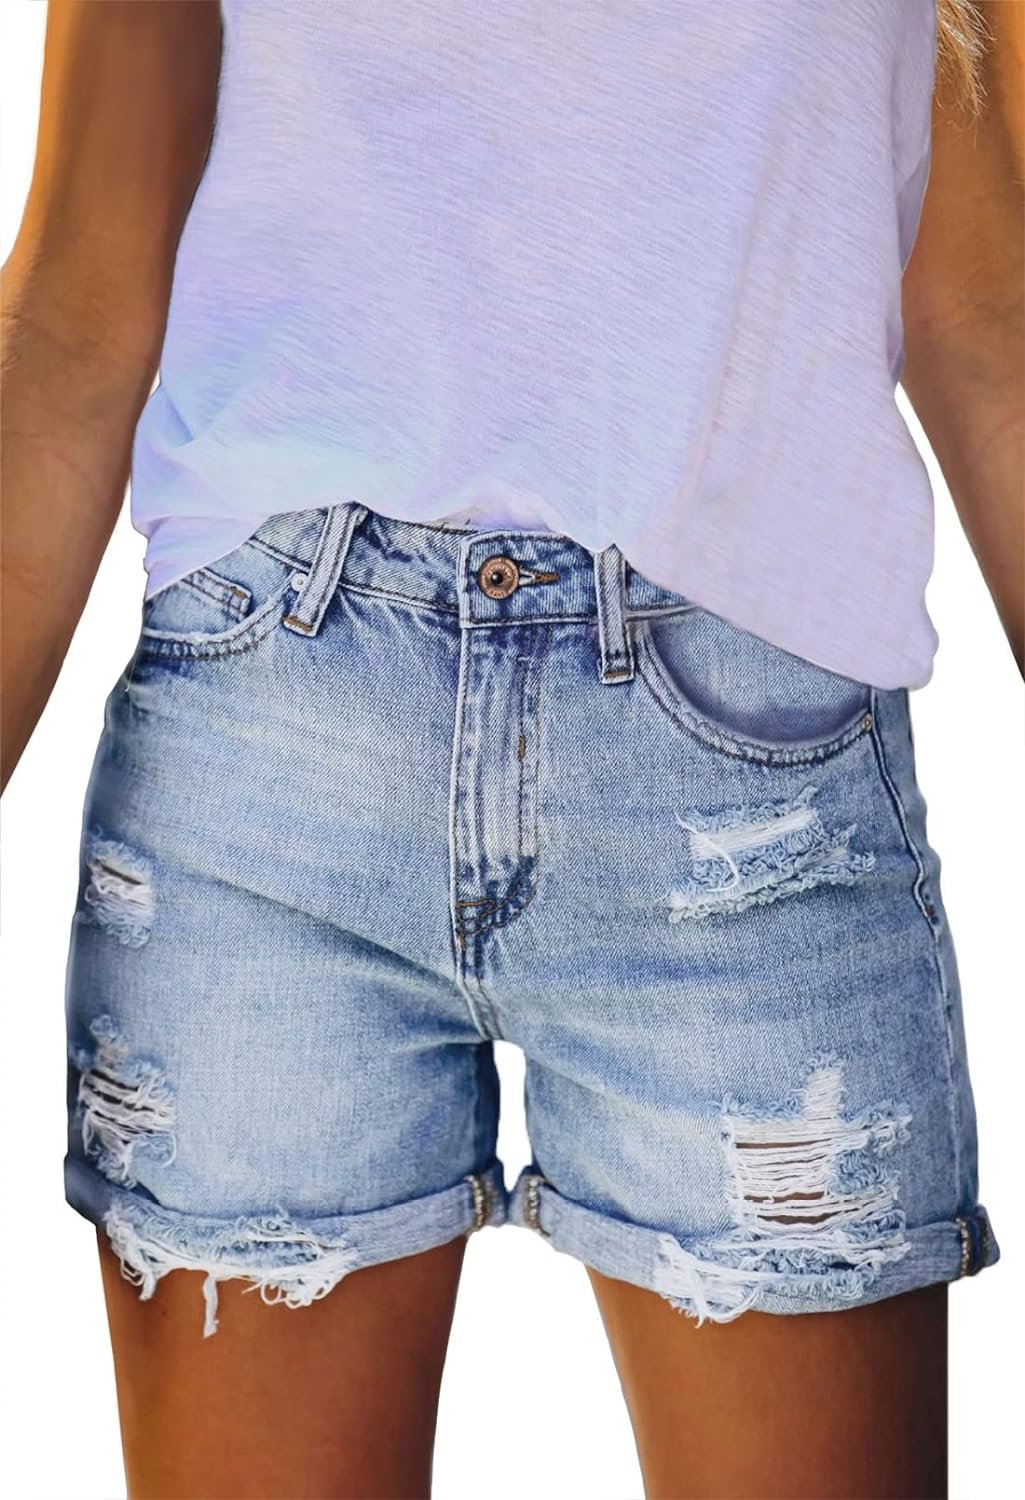 Pink Queen Womens High Waisted Denim Shorts Casual Ripped Summer Hot Short Jeans Frayed Distressed Jeans Shorts with Pockets